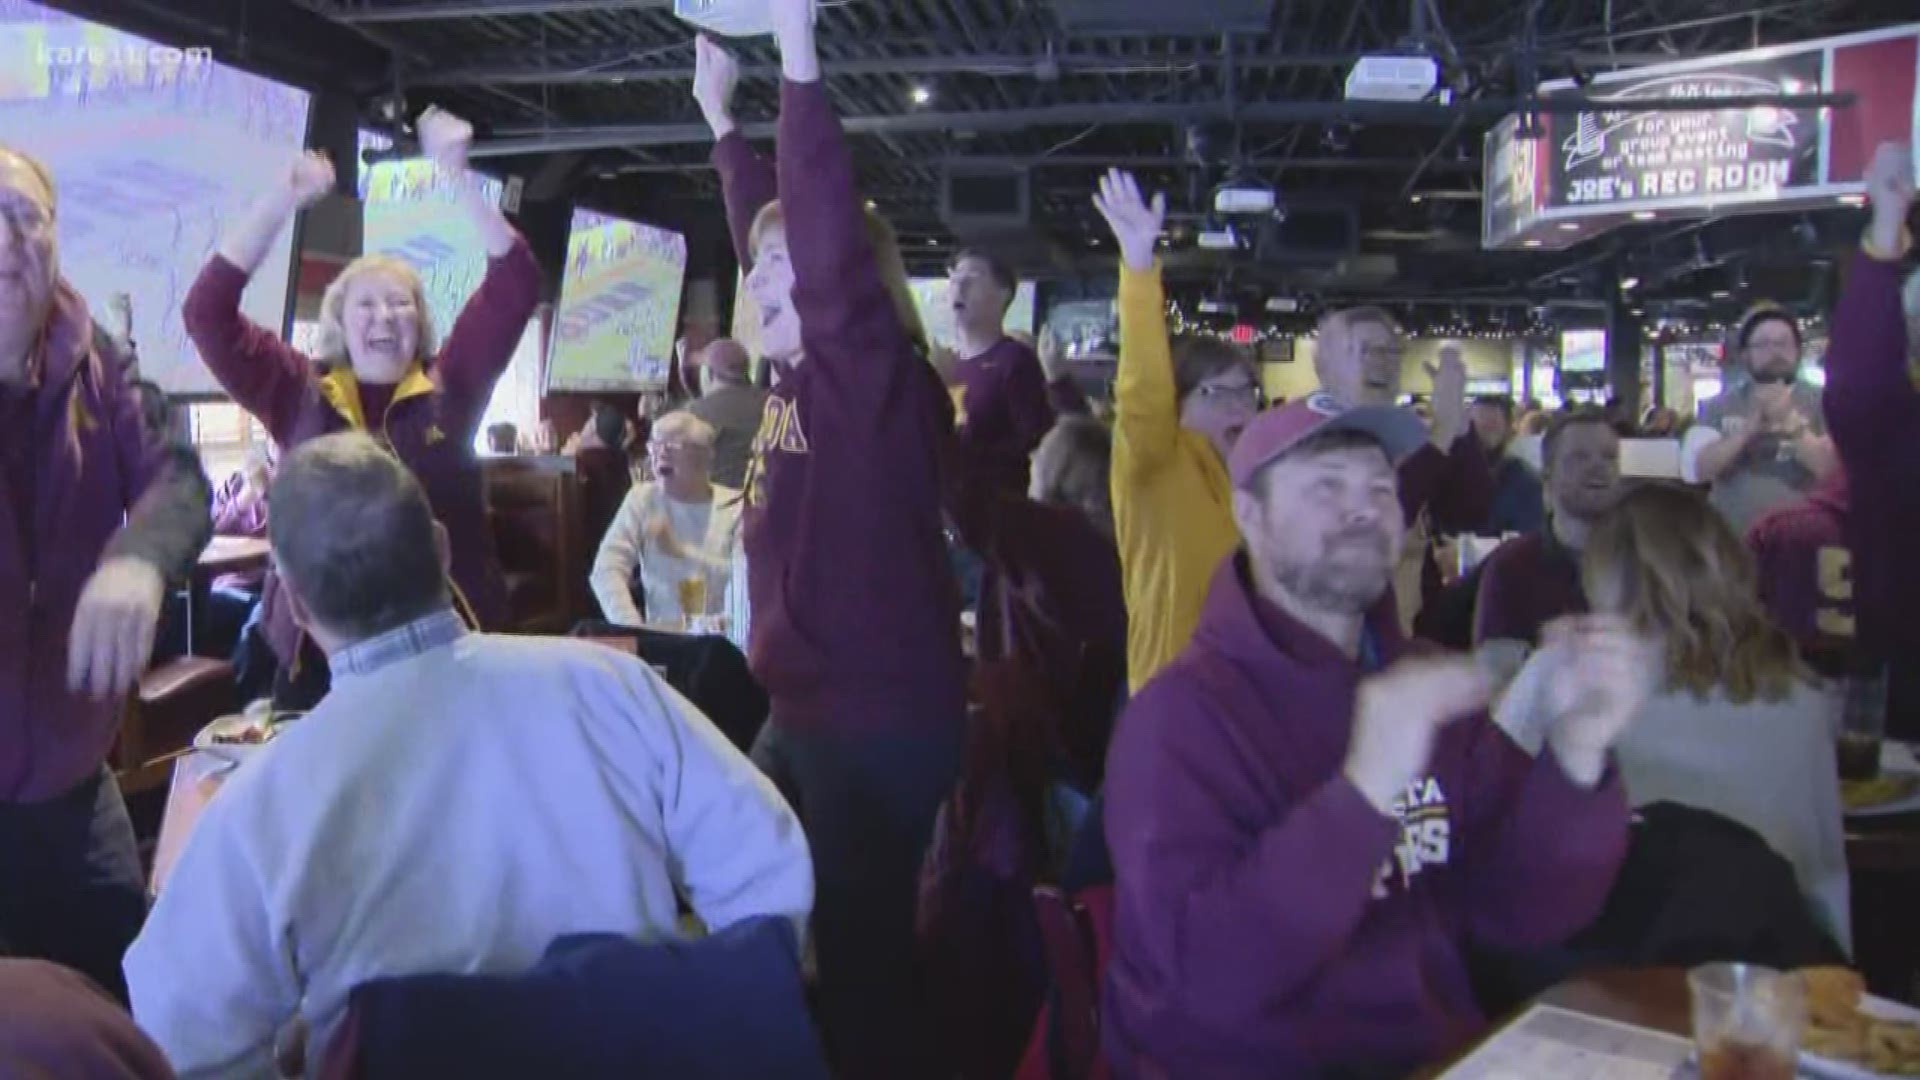 Fans who couldn't make it to Tampa packed local sports bars and were on the edge of their seats until Minnesota ground out the victory.